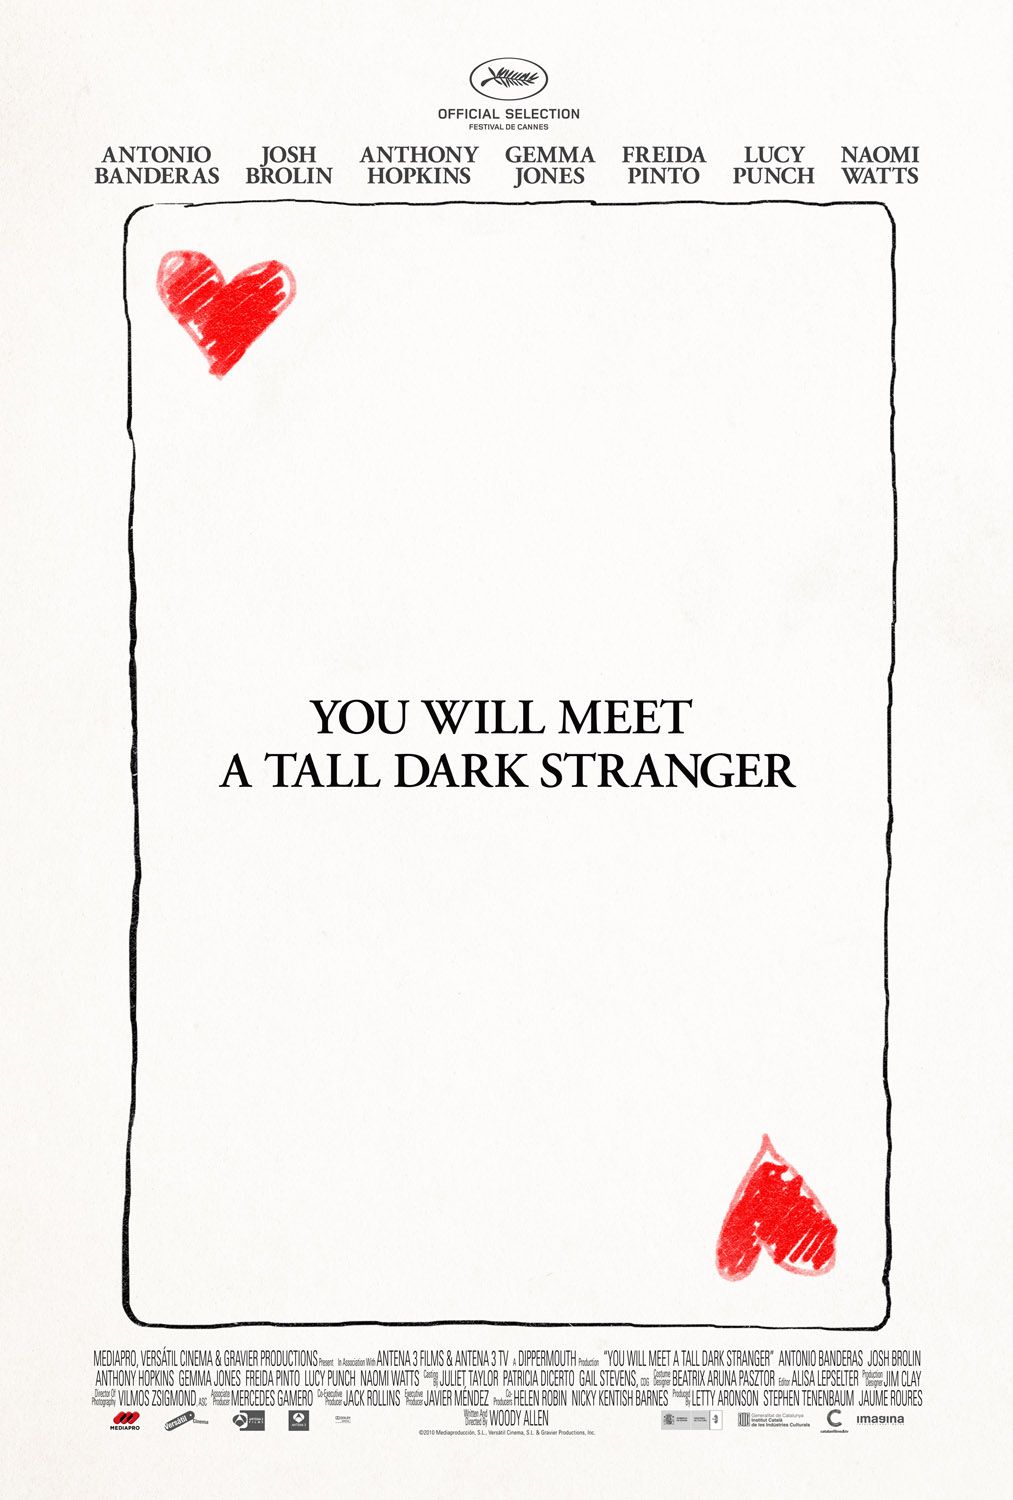  You Will Meet A Tall Dark Stranger teaser poster from the Cannes Film Festival.